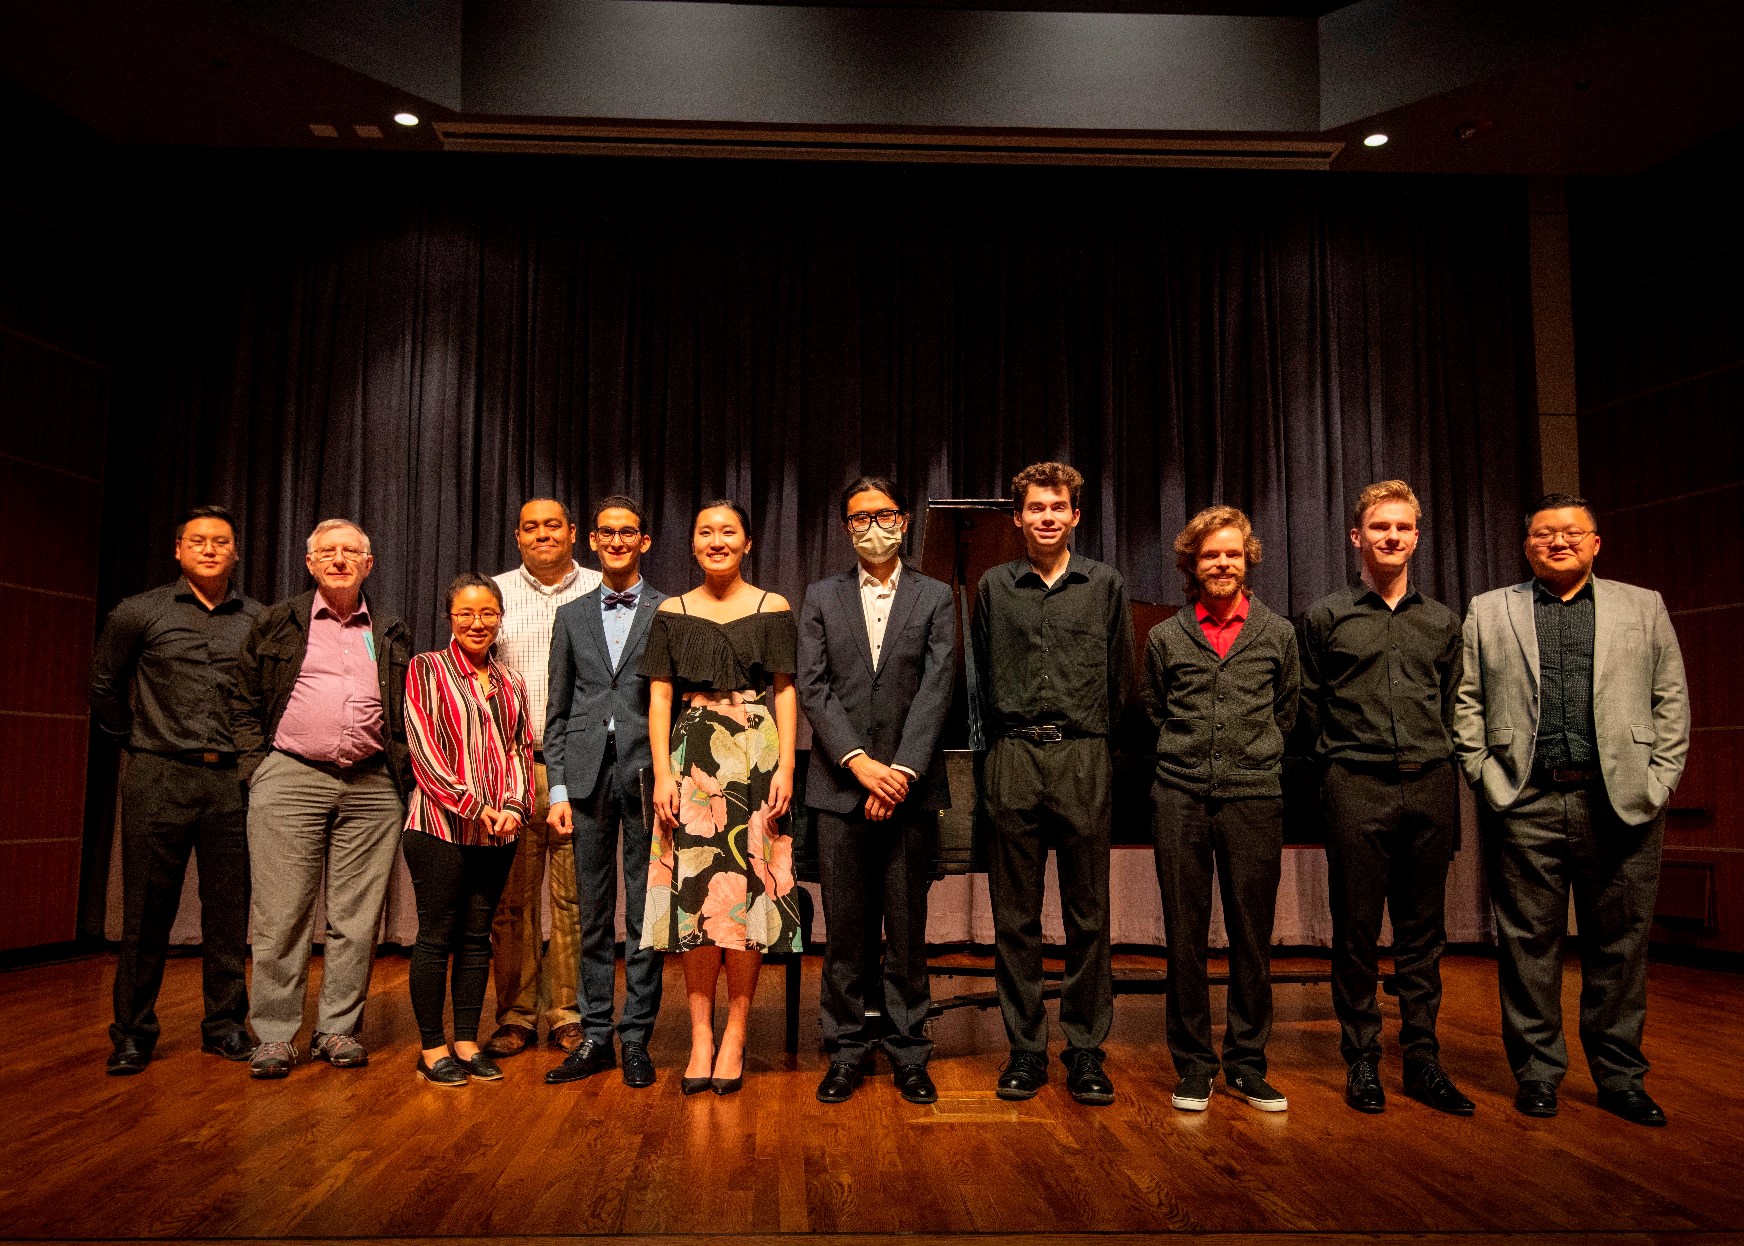 Students along with faculty members Ester Park and Daryl Carter on stage in front of a piano